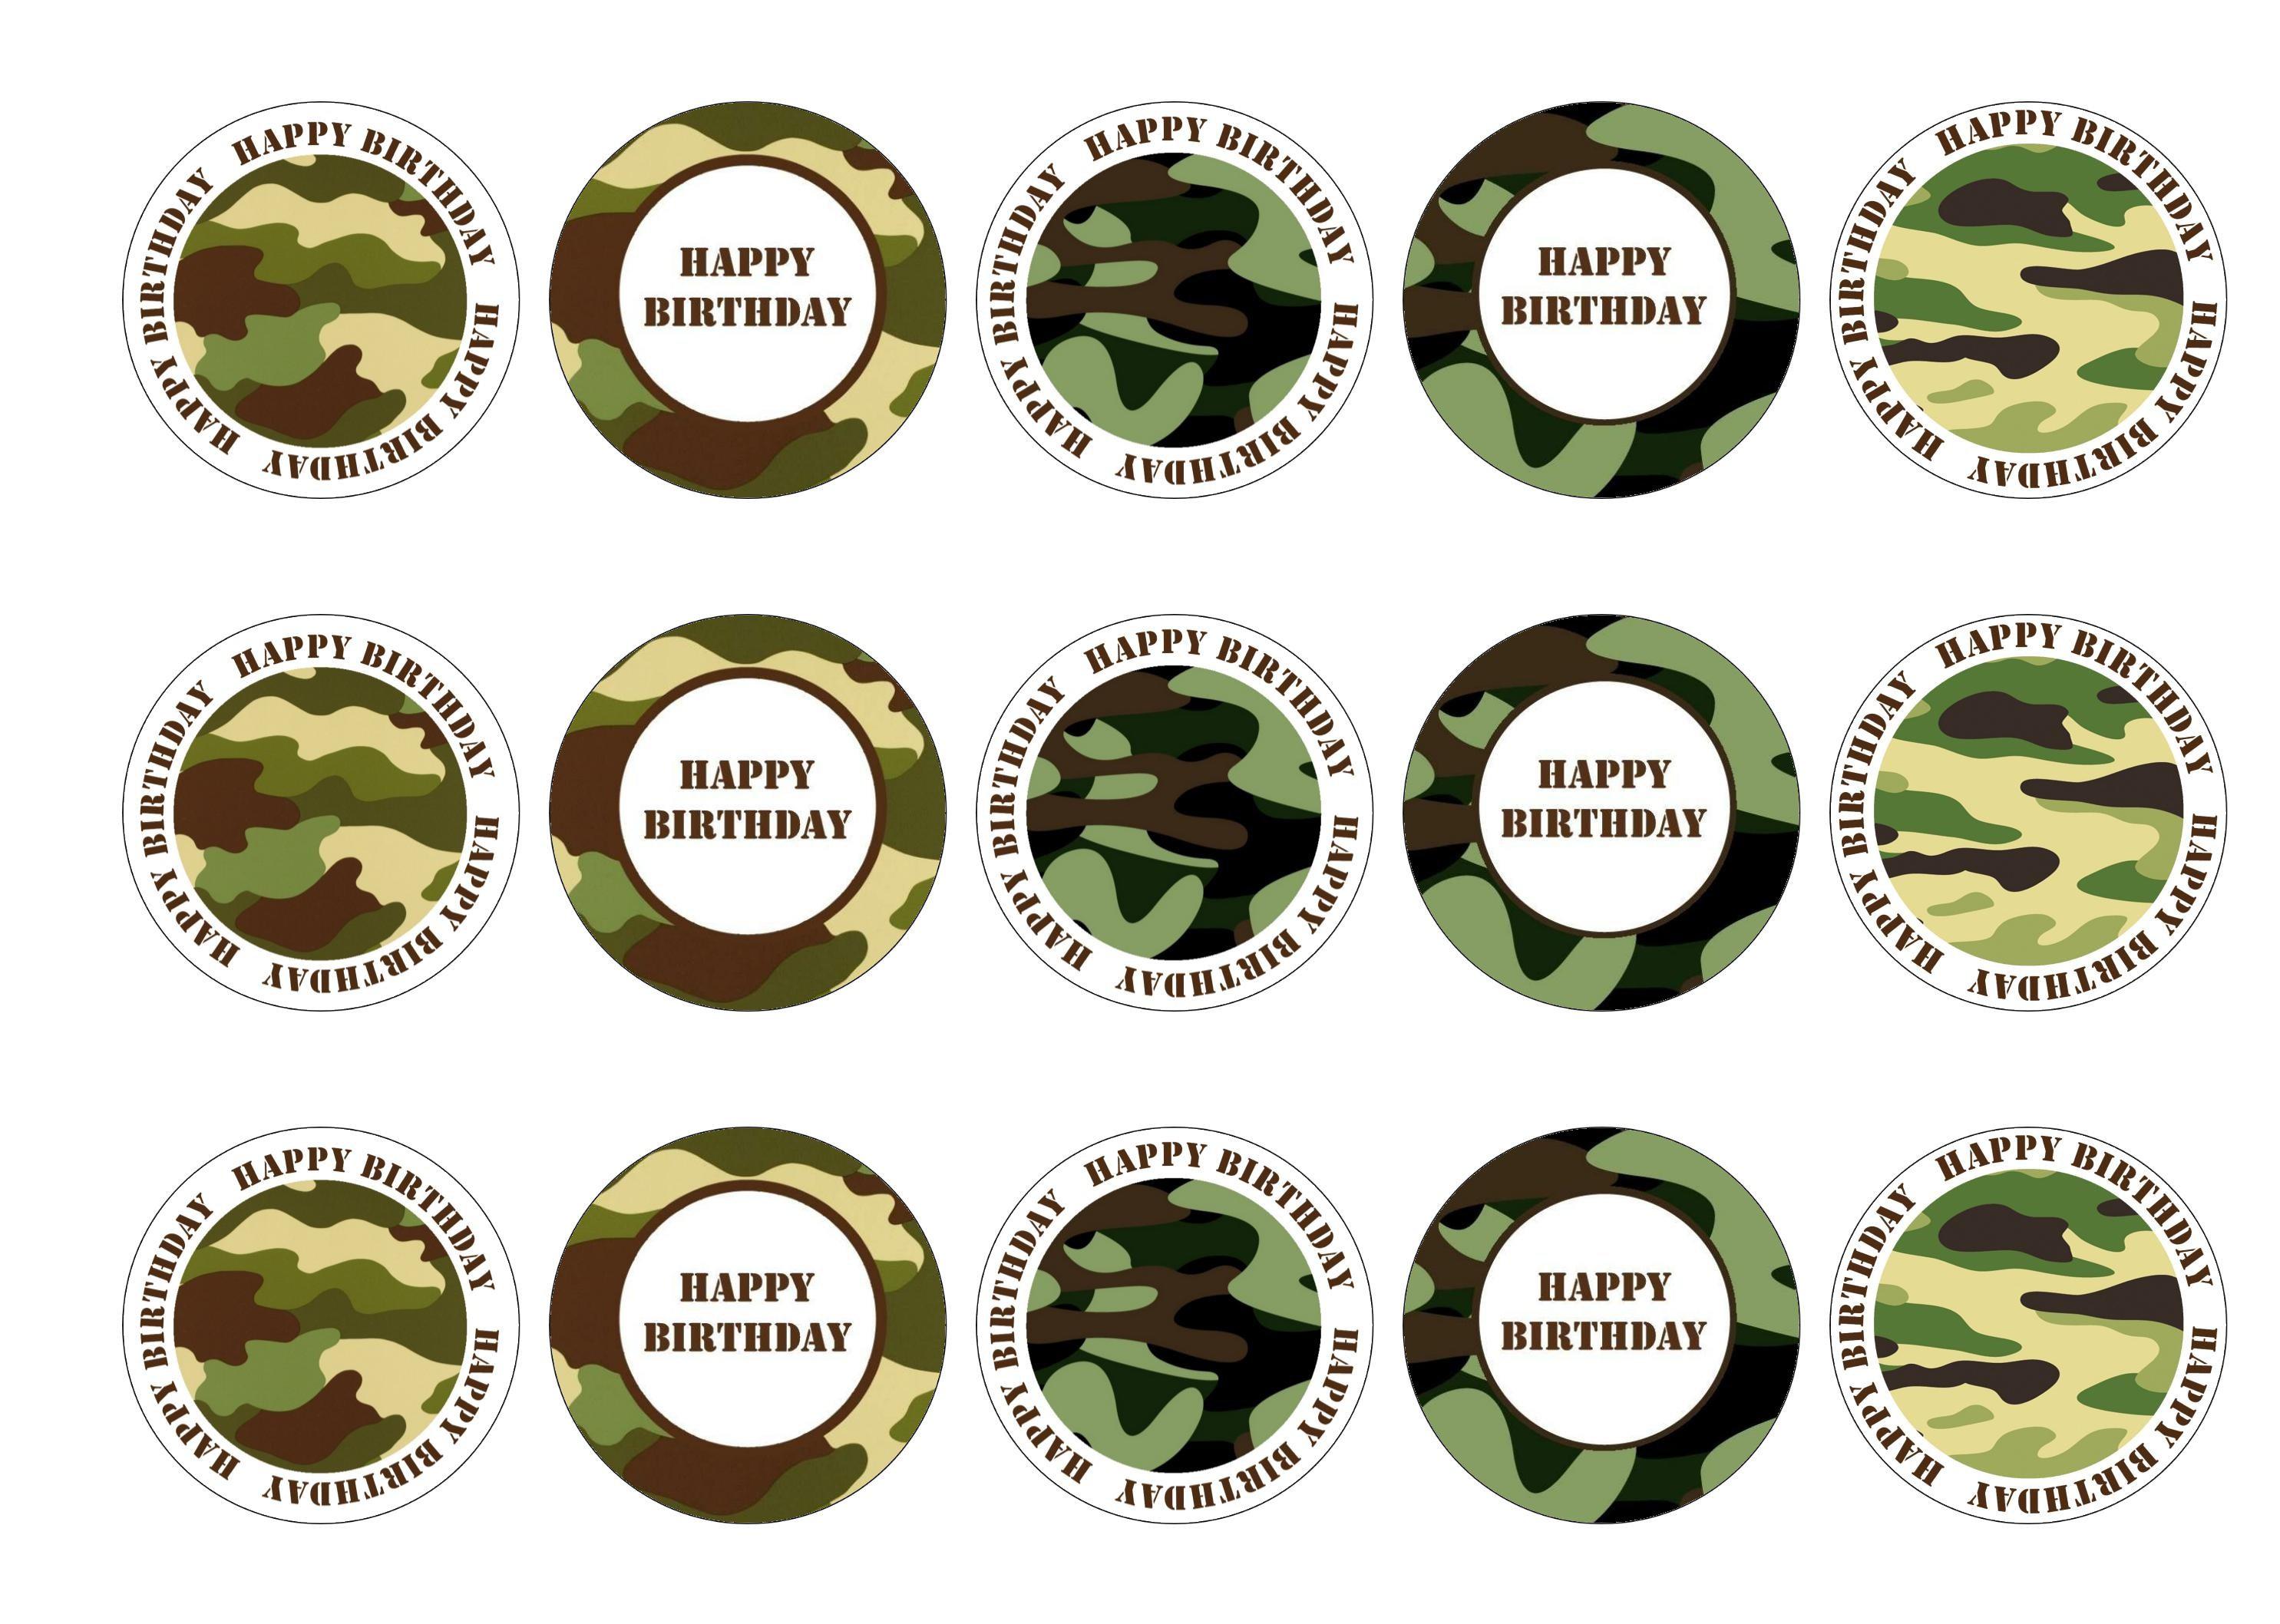 Printed edible birthday cupcake toppers with camouflage design